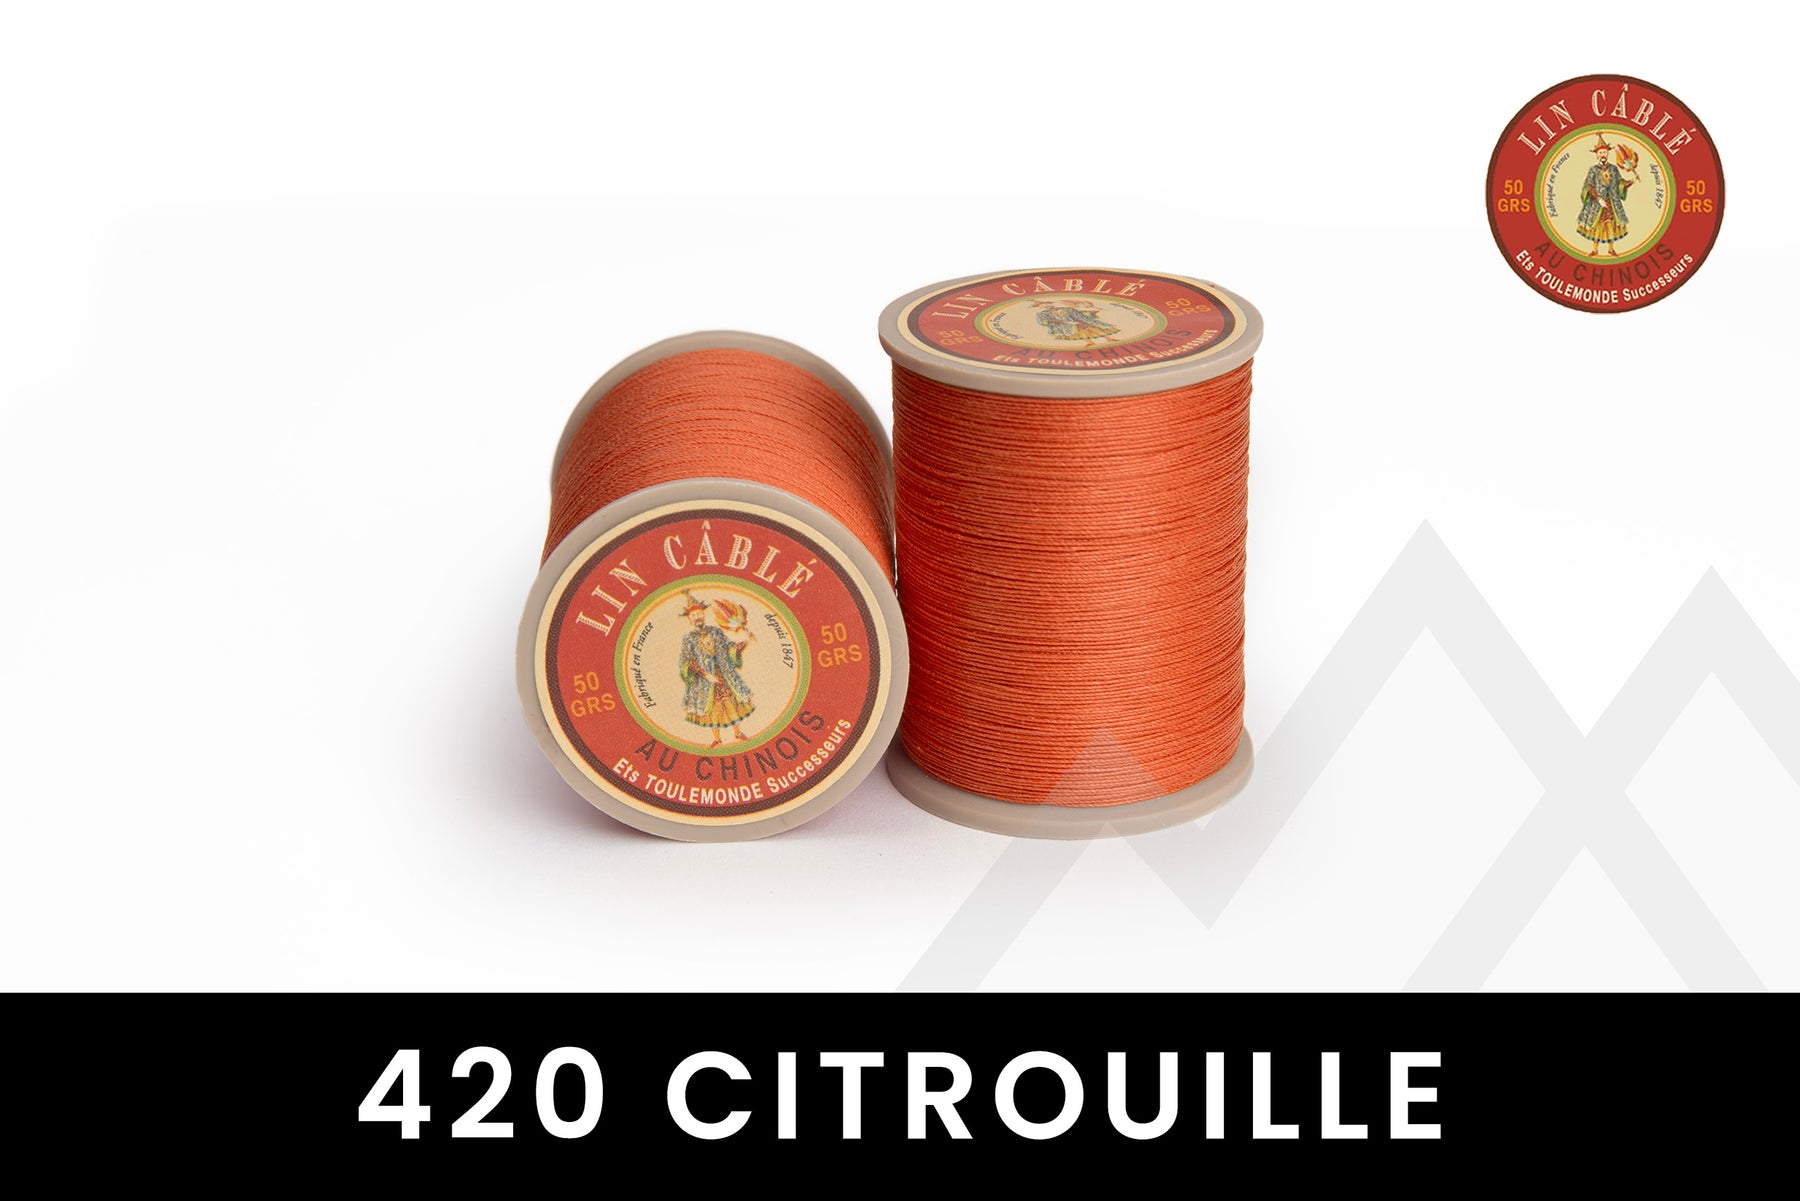 Fil au Chinois 🇫🇷 - "Lin Cable" Waxed Linen Thread (Size 332) *Full Spool